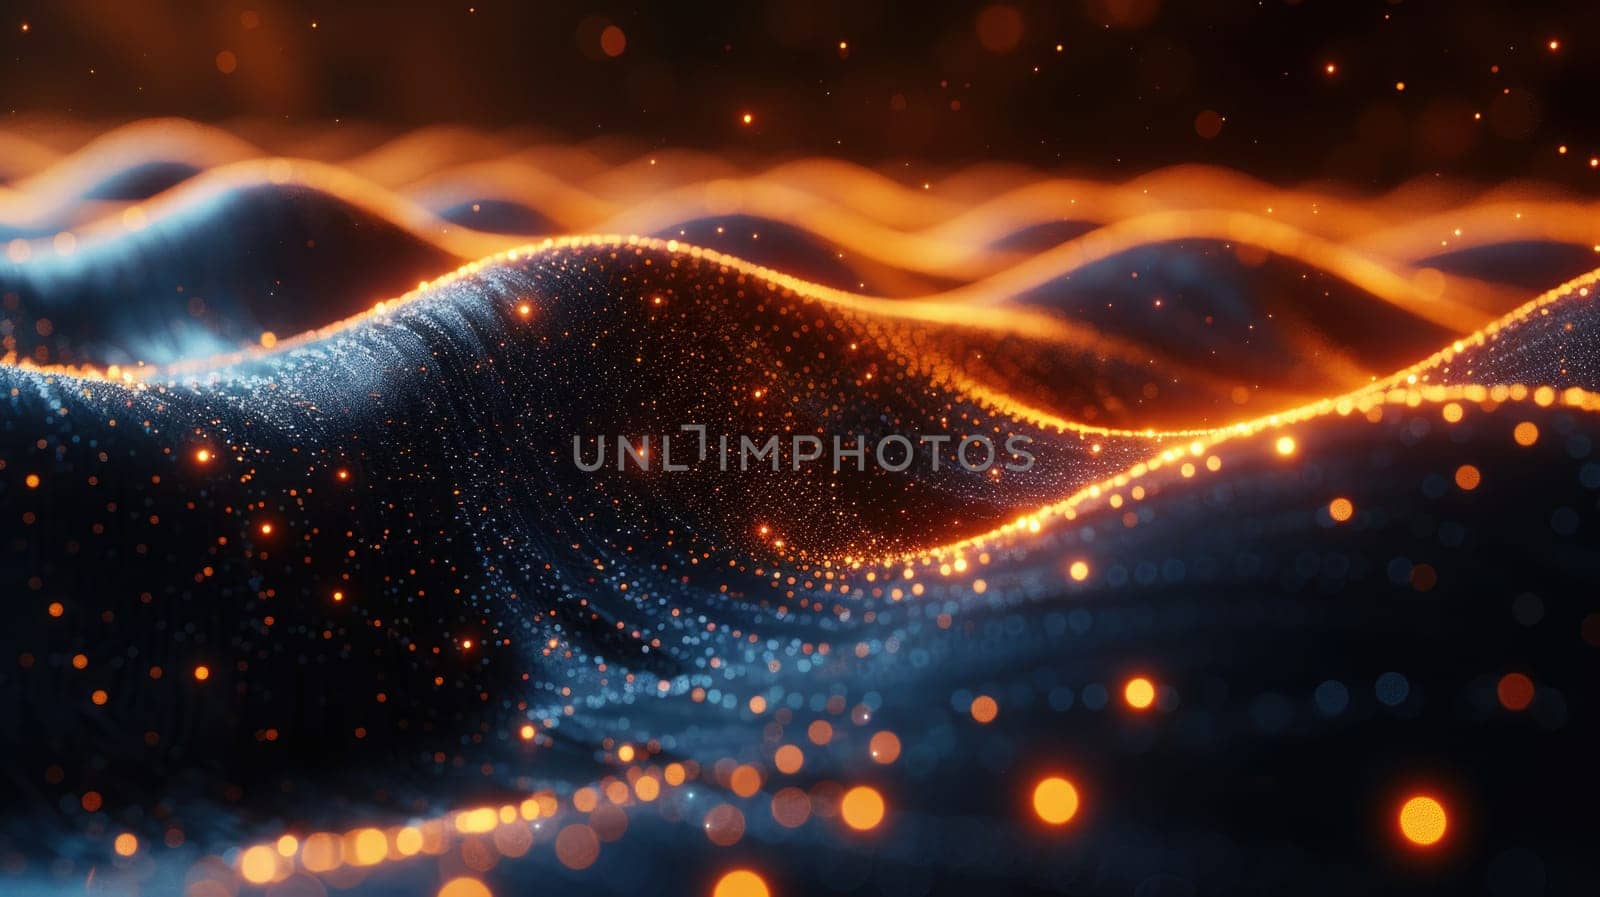 This computer-generated image captures the vibrant and dynamic movement of a wave of light.